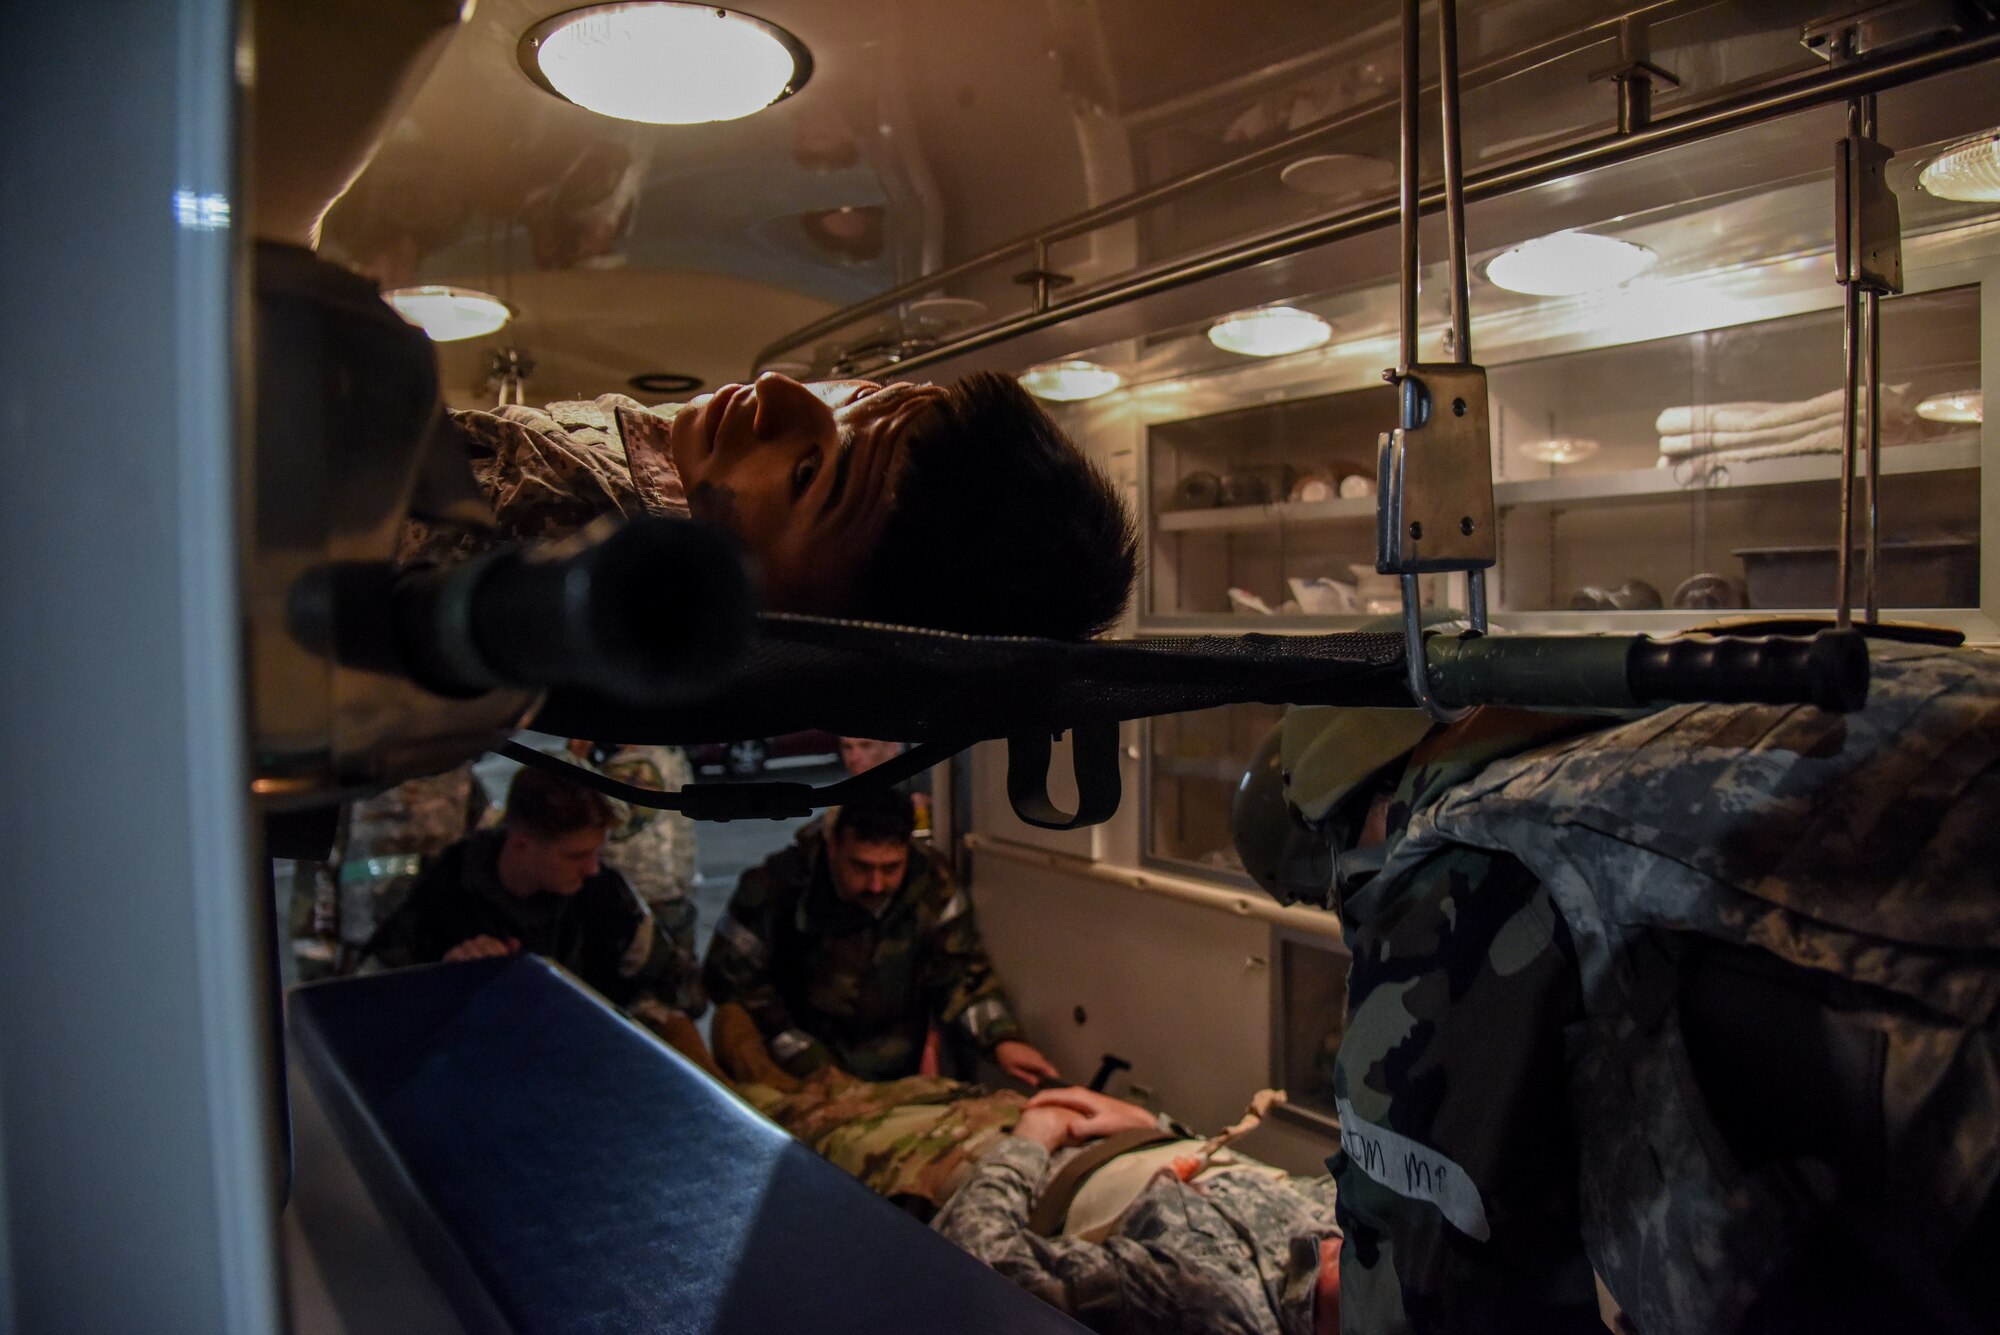 Airman 1st Class George Molina, 51st Civil Engineer Squadron augmentee, looks out of an ambulance as 51st CES firefighters and the 51st Medical Group Field Response Team load injured Airmen during a training event